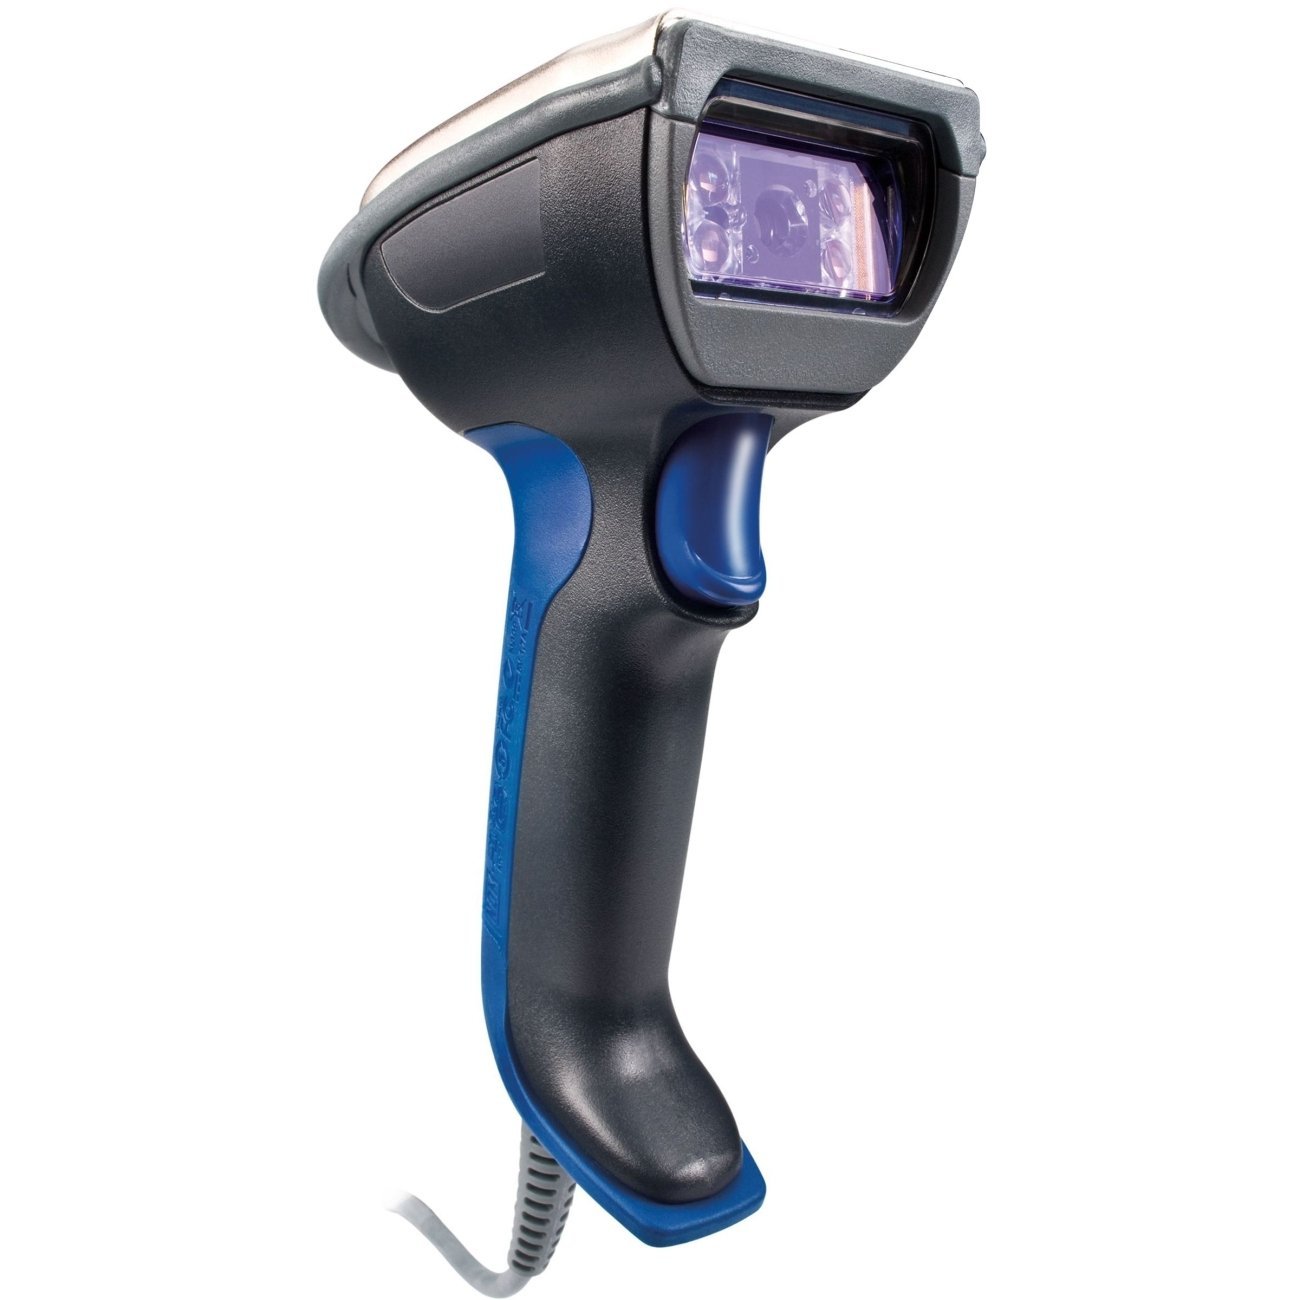 Intermec SR61THP-002 Series SR61 Rugged Handheld Scanner, High Performance Area Imager, EA30 Scan Engine with Laser Aimer, Requires Cable